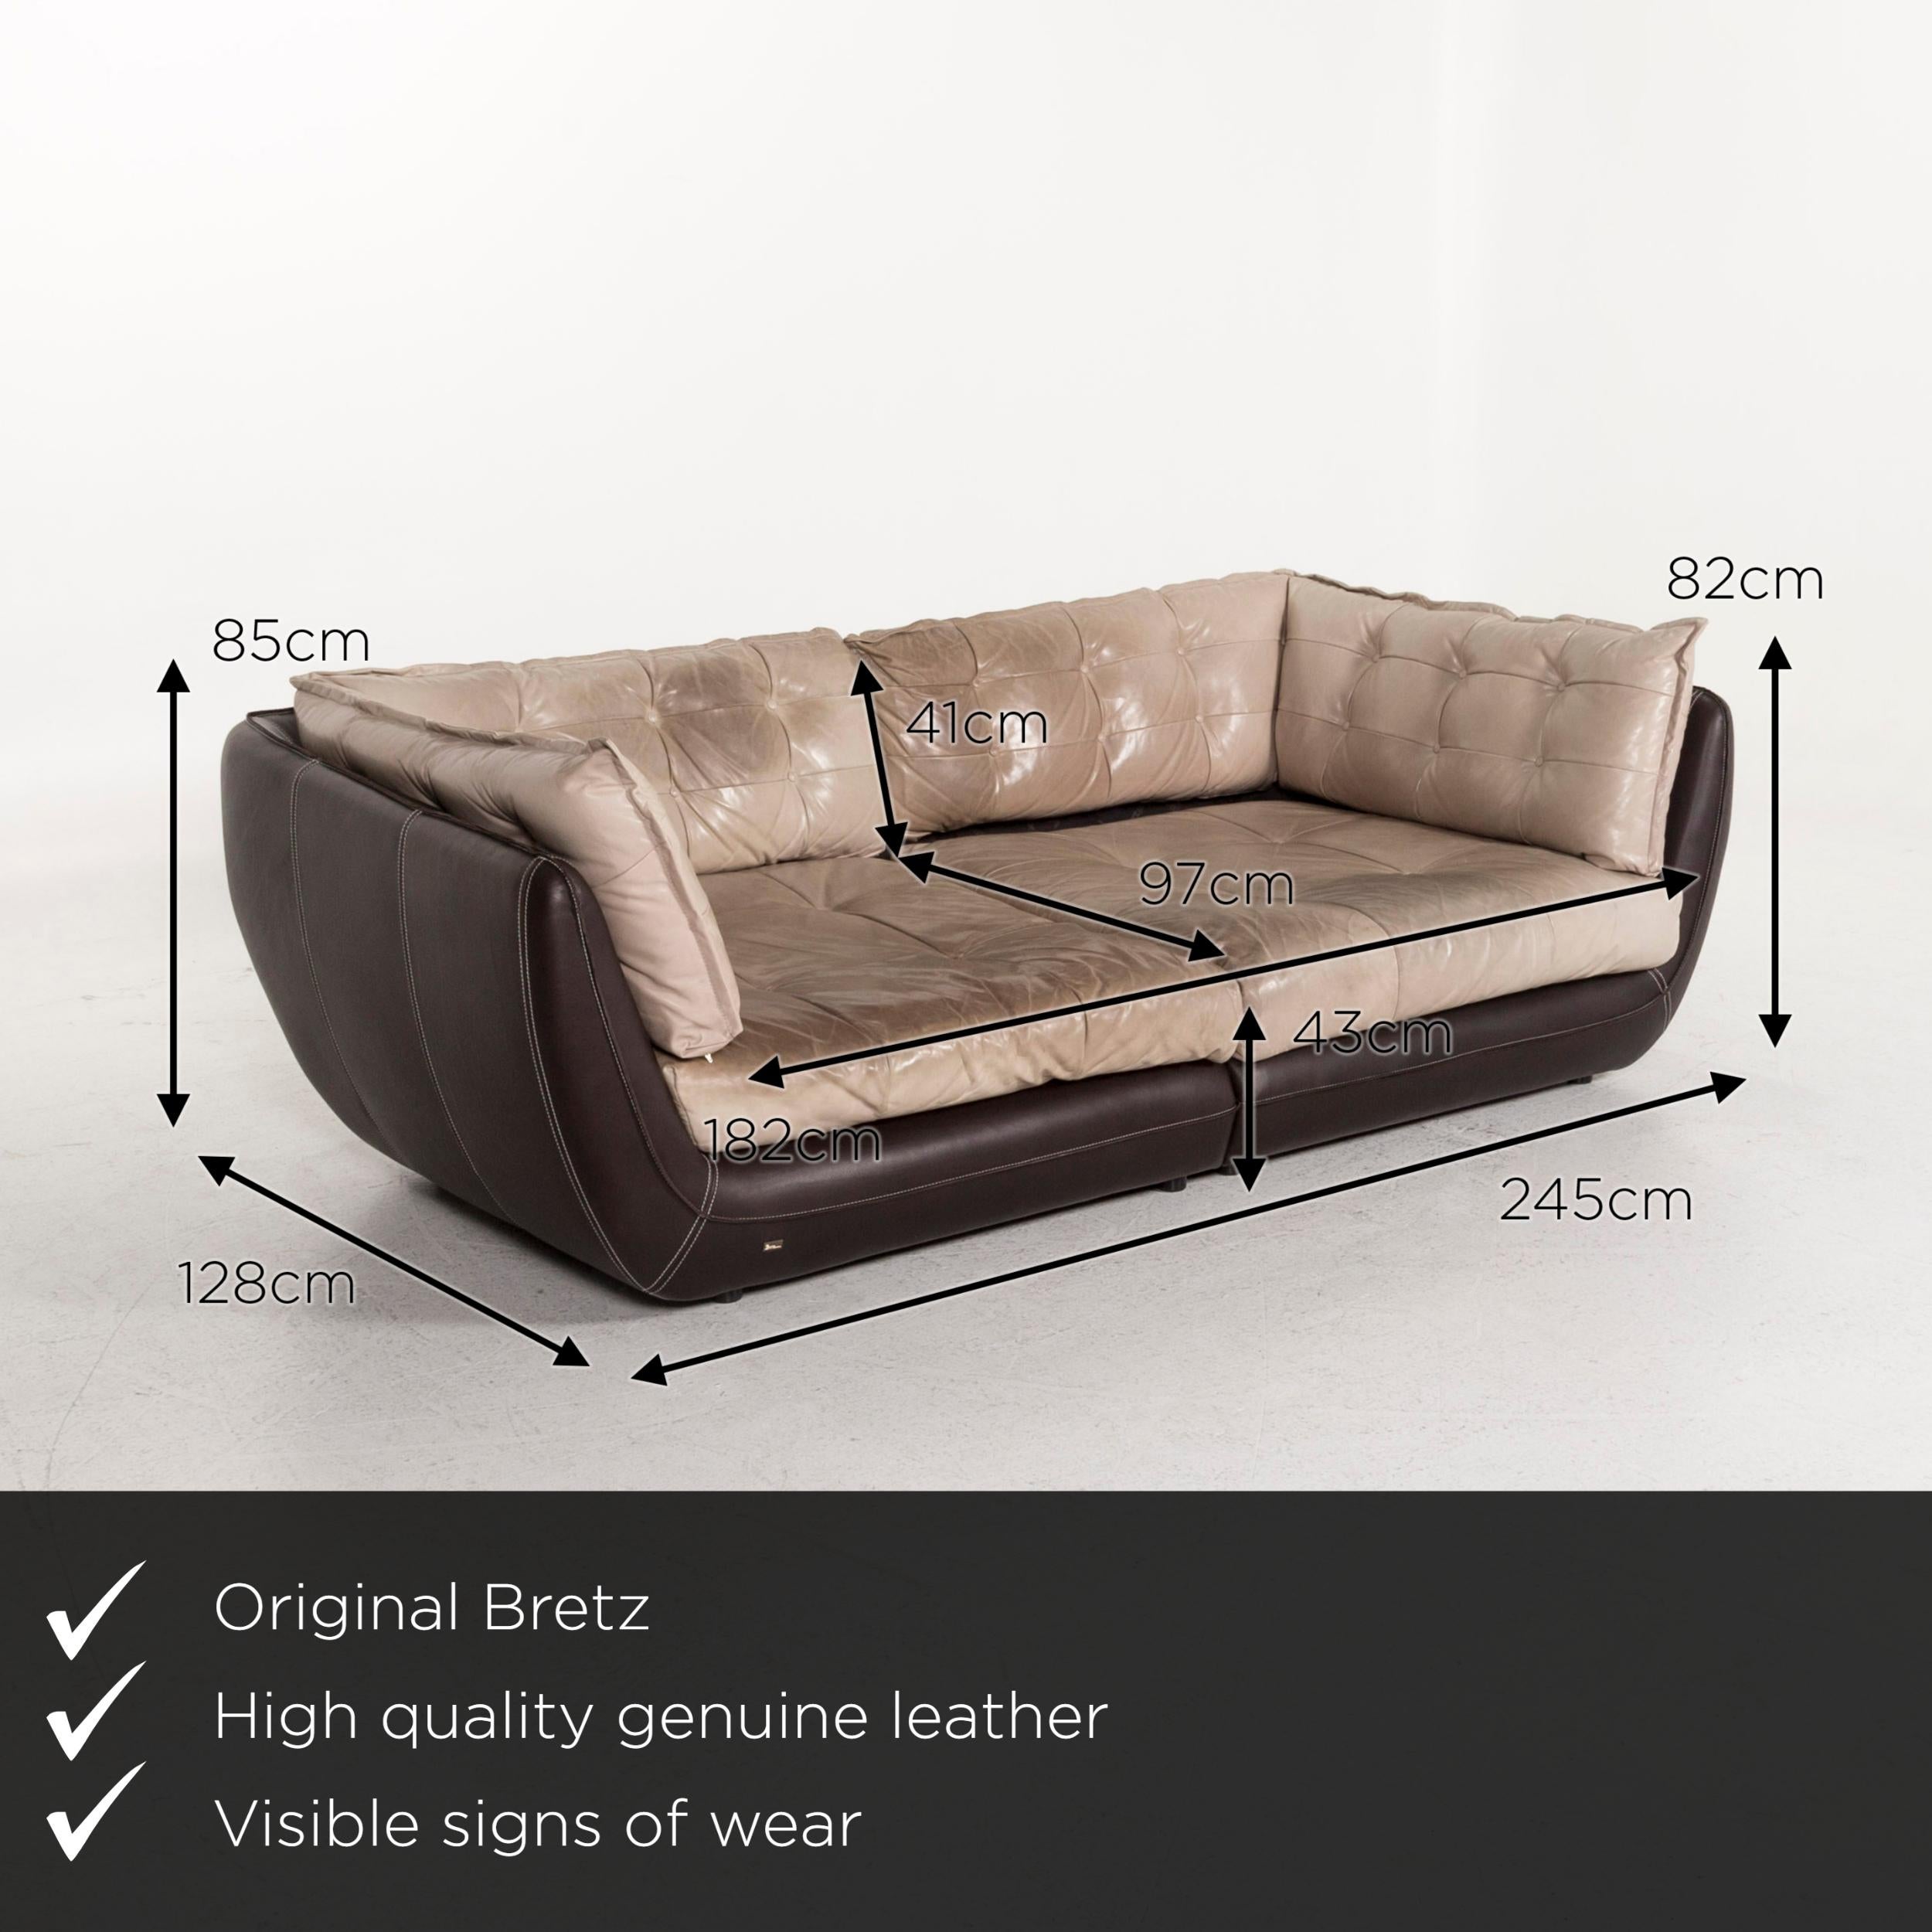 We present to you a Bretz Cupcake Jepard leather sofa brown beige four-seat couch.
 

 Product measurements in centimeters:
 

Depth 128
Width 245
Height 85
Seat height 43
Rest height 82
Seat depth 97
Seat width 182
Back height 41.
 
 